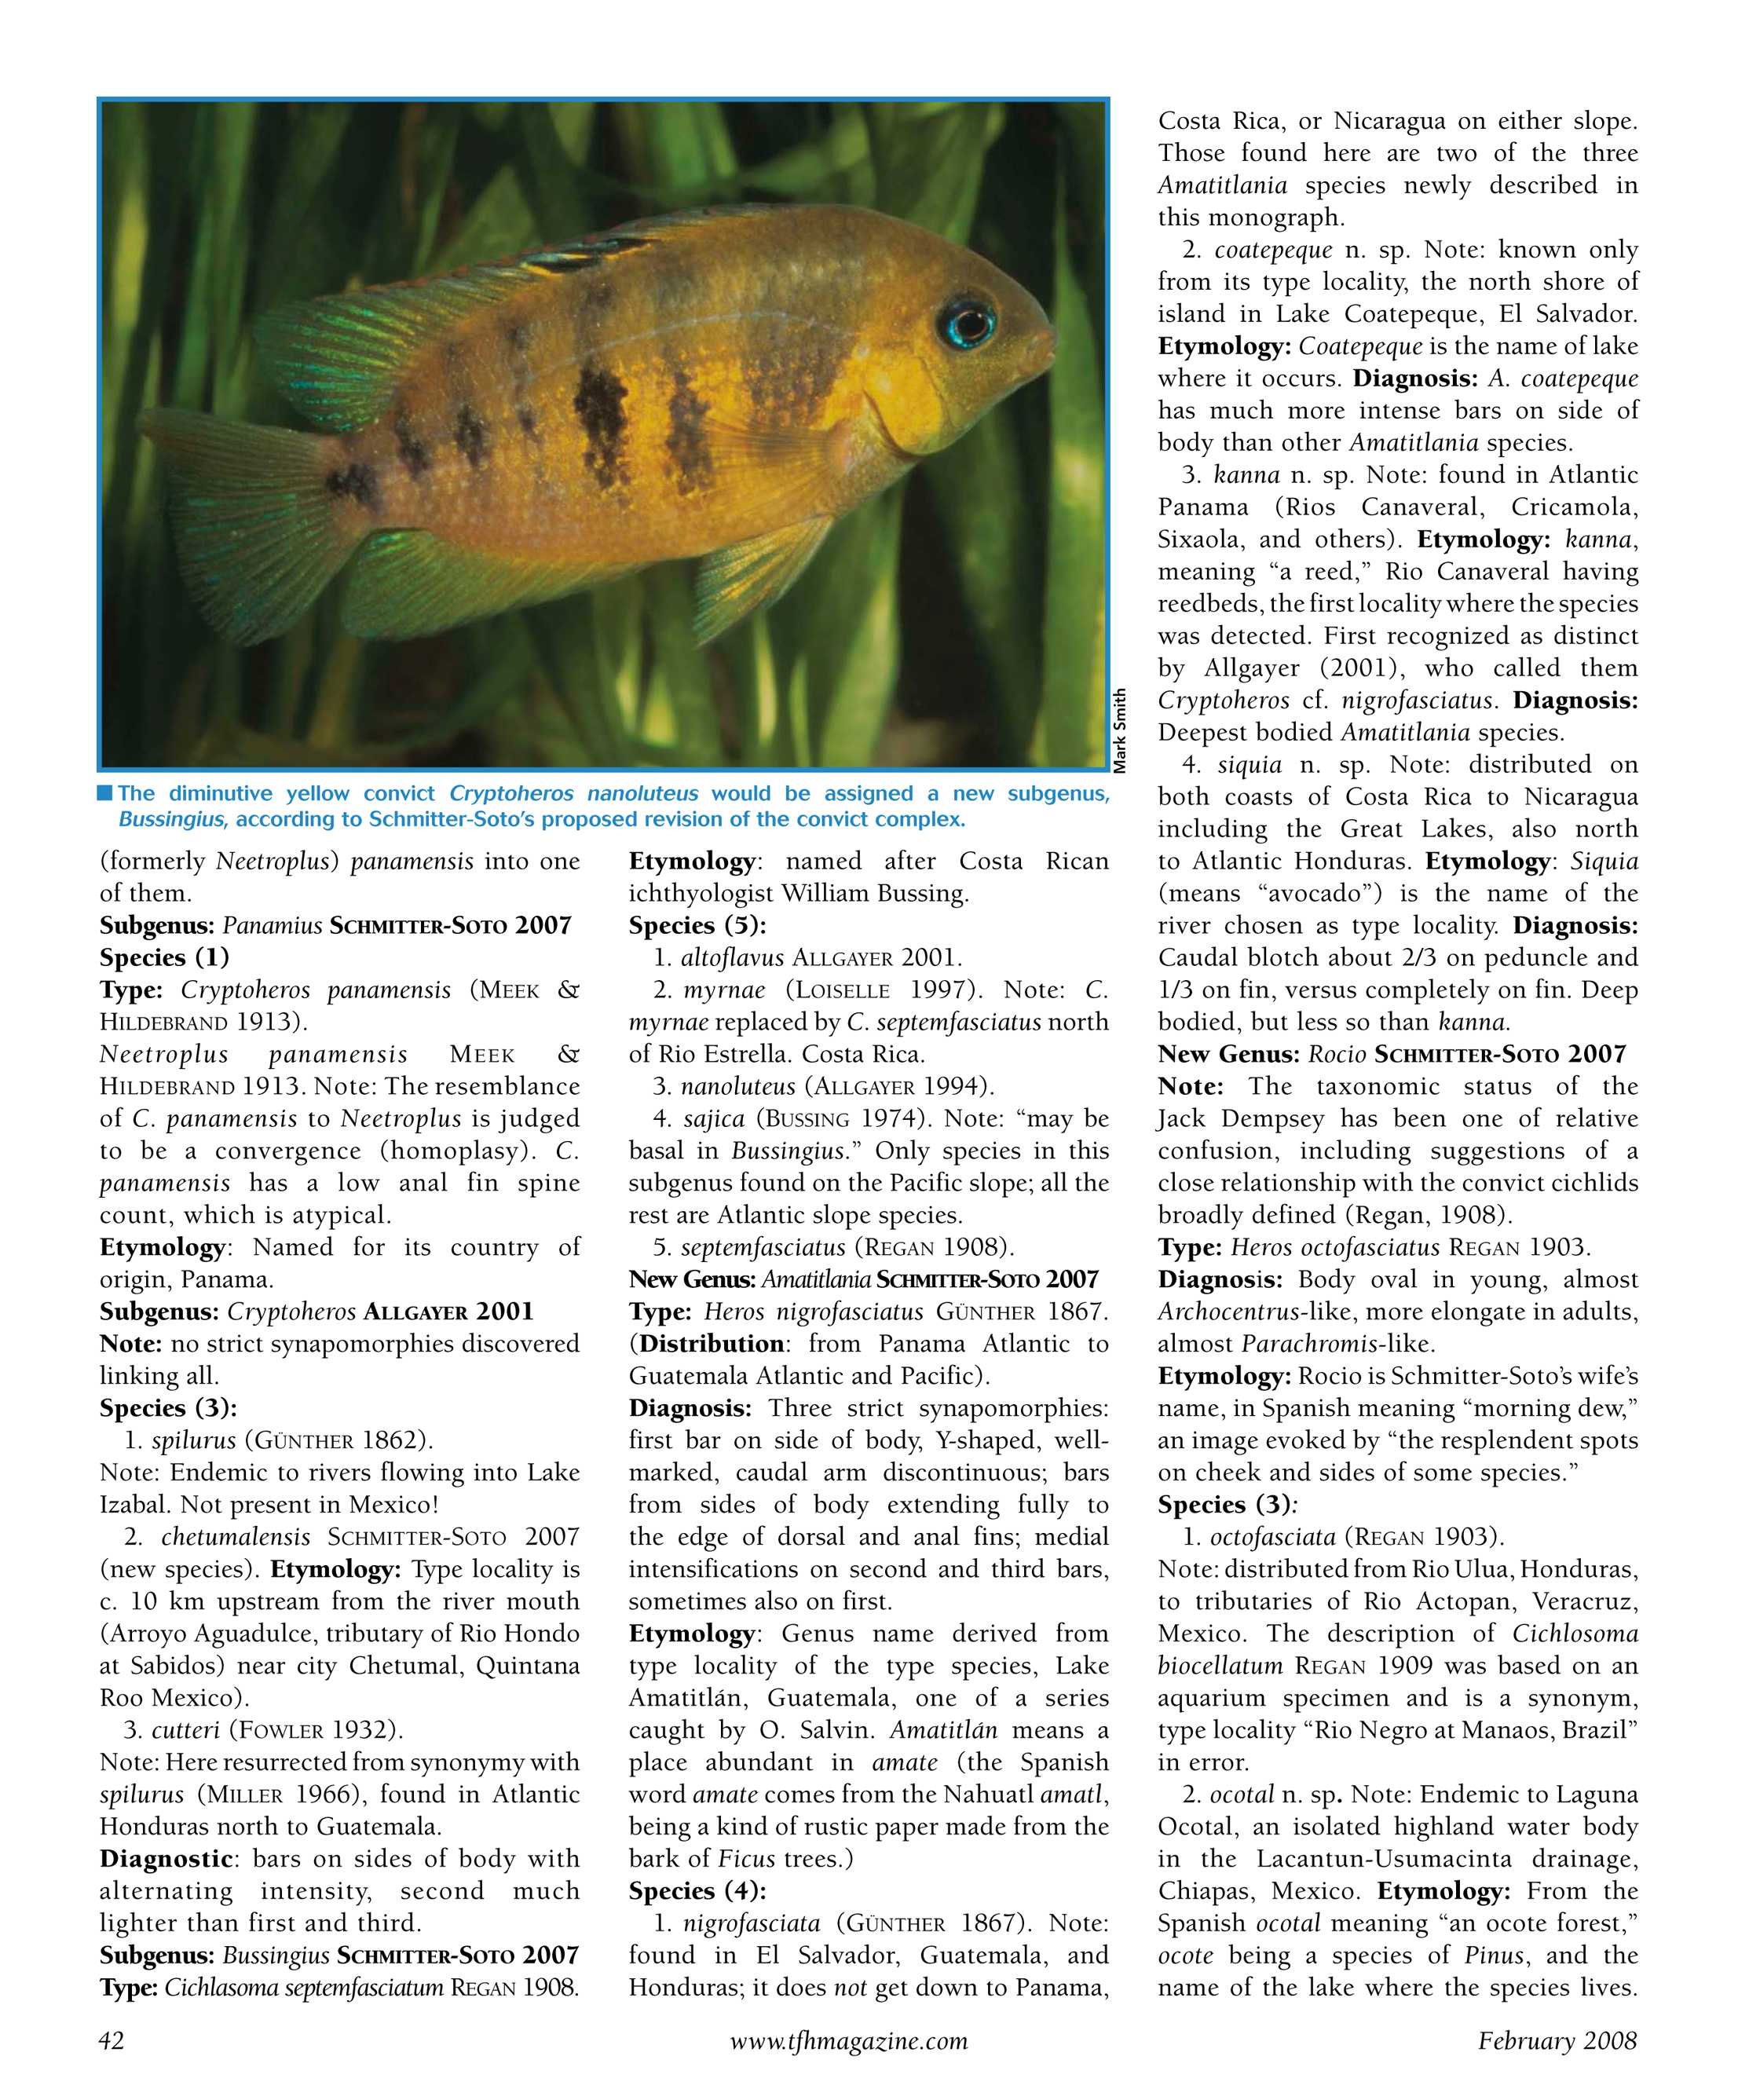 Tropical Fish Hobbyist - February 2008 - page 42